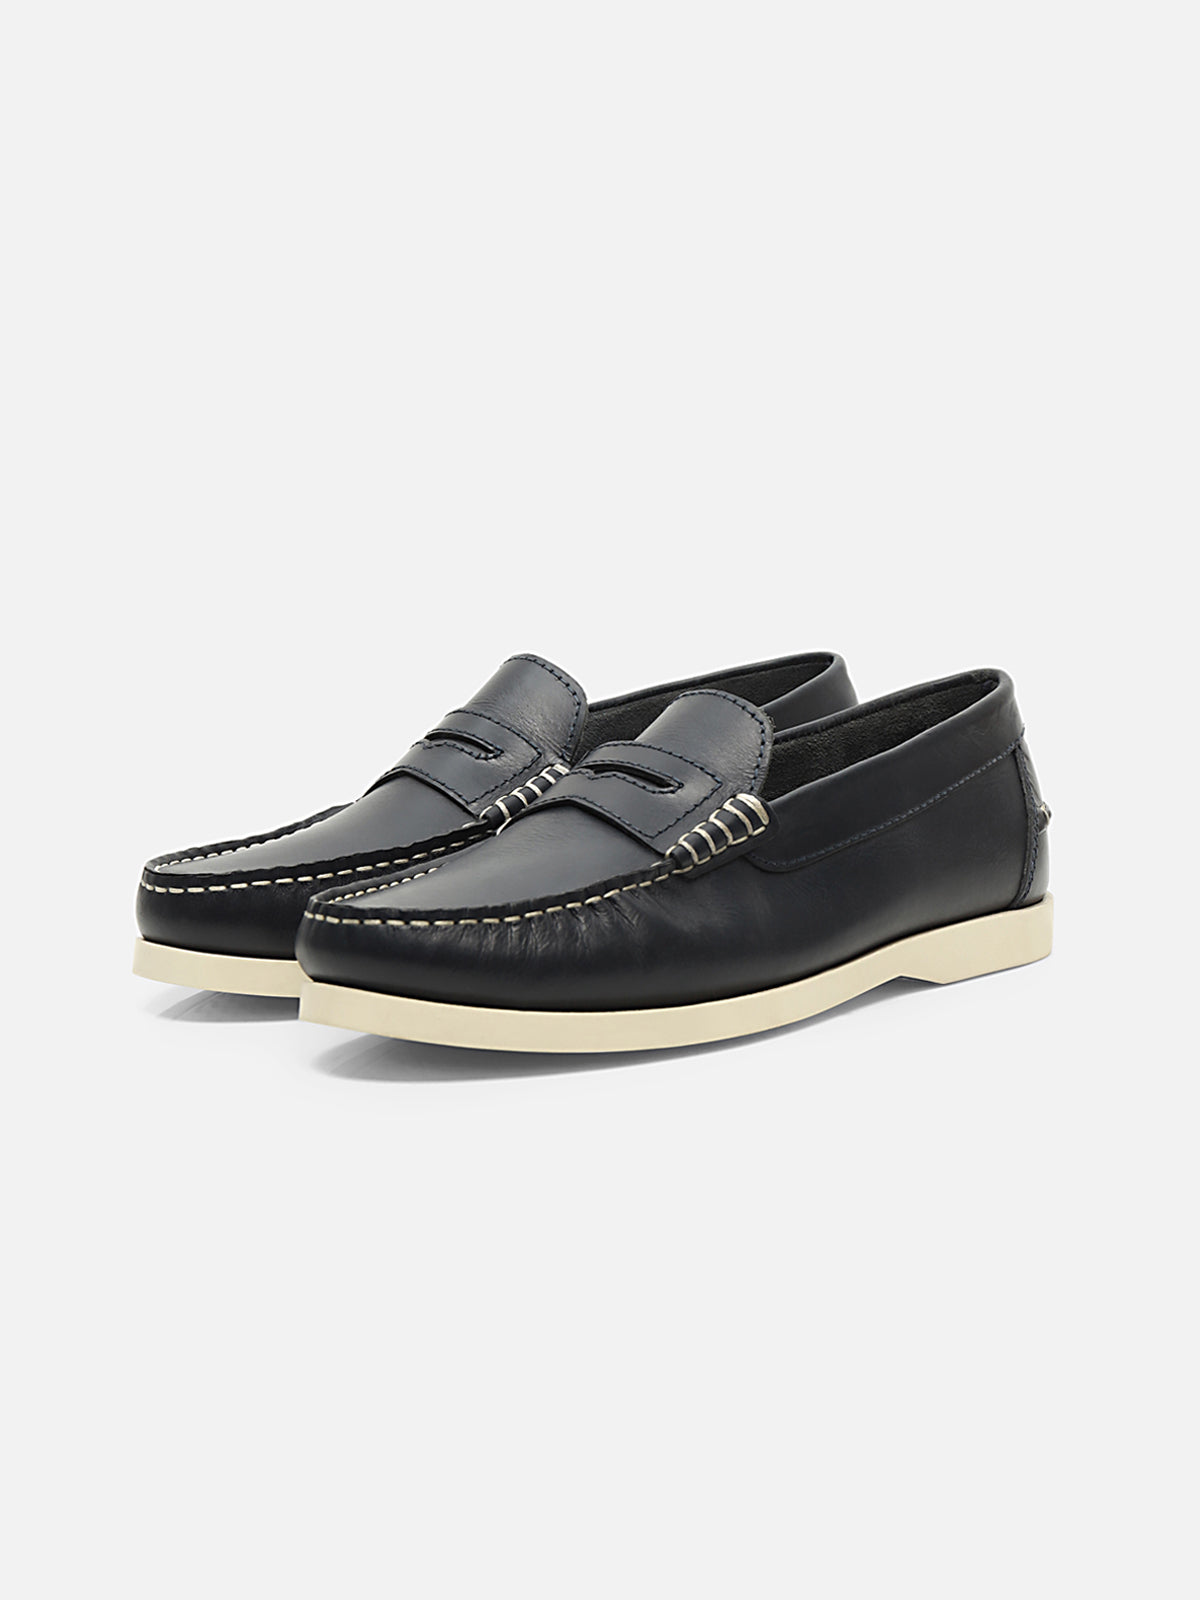 Leather Penny Loafer Shoe - FAMS24-039